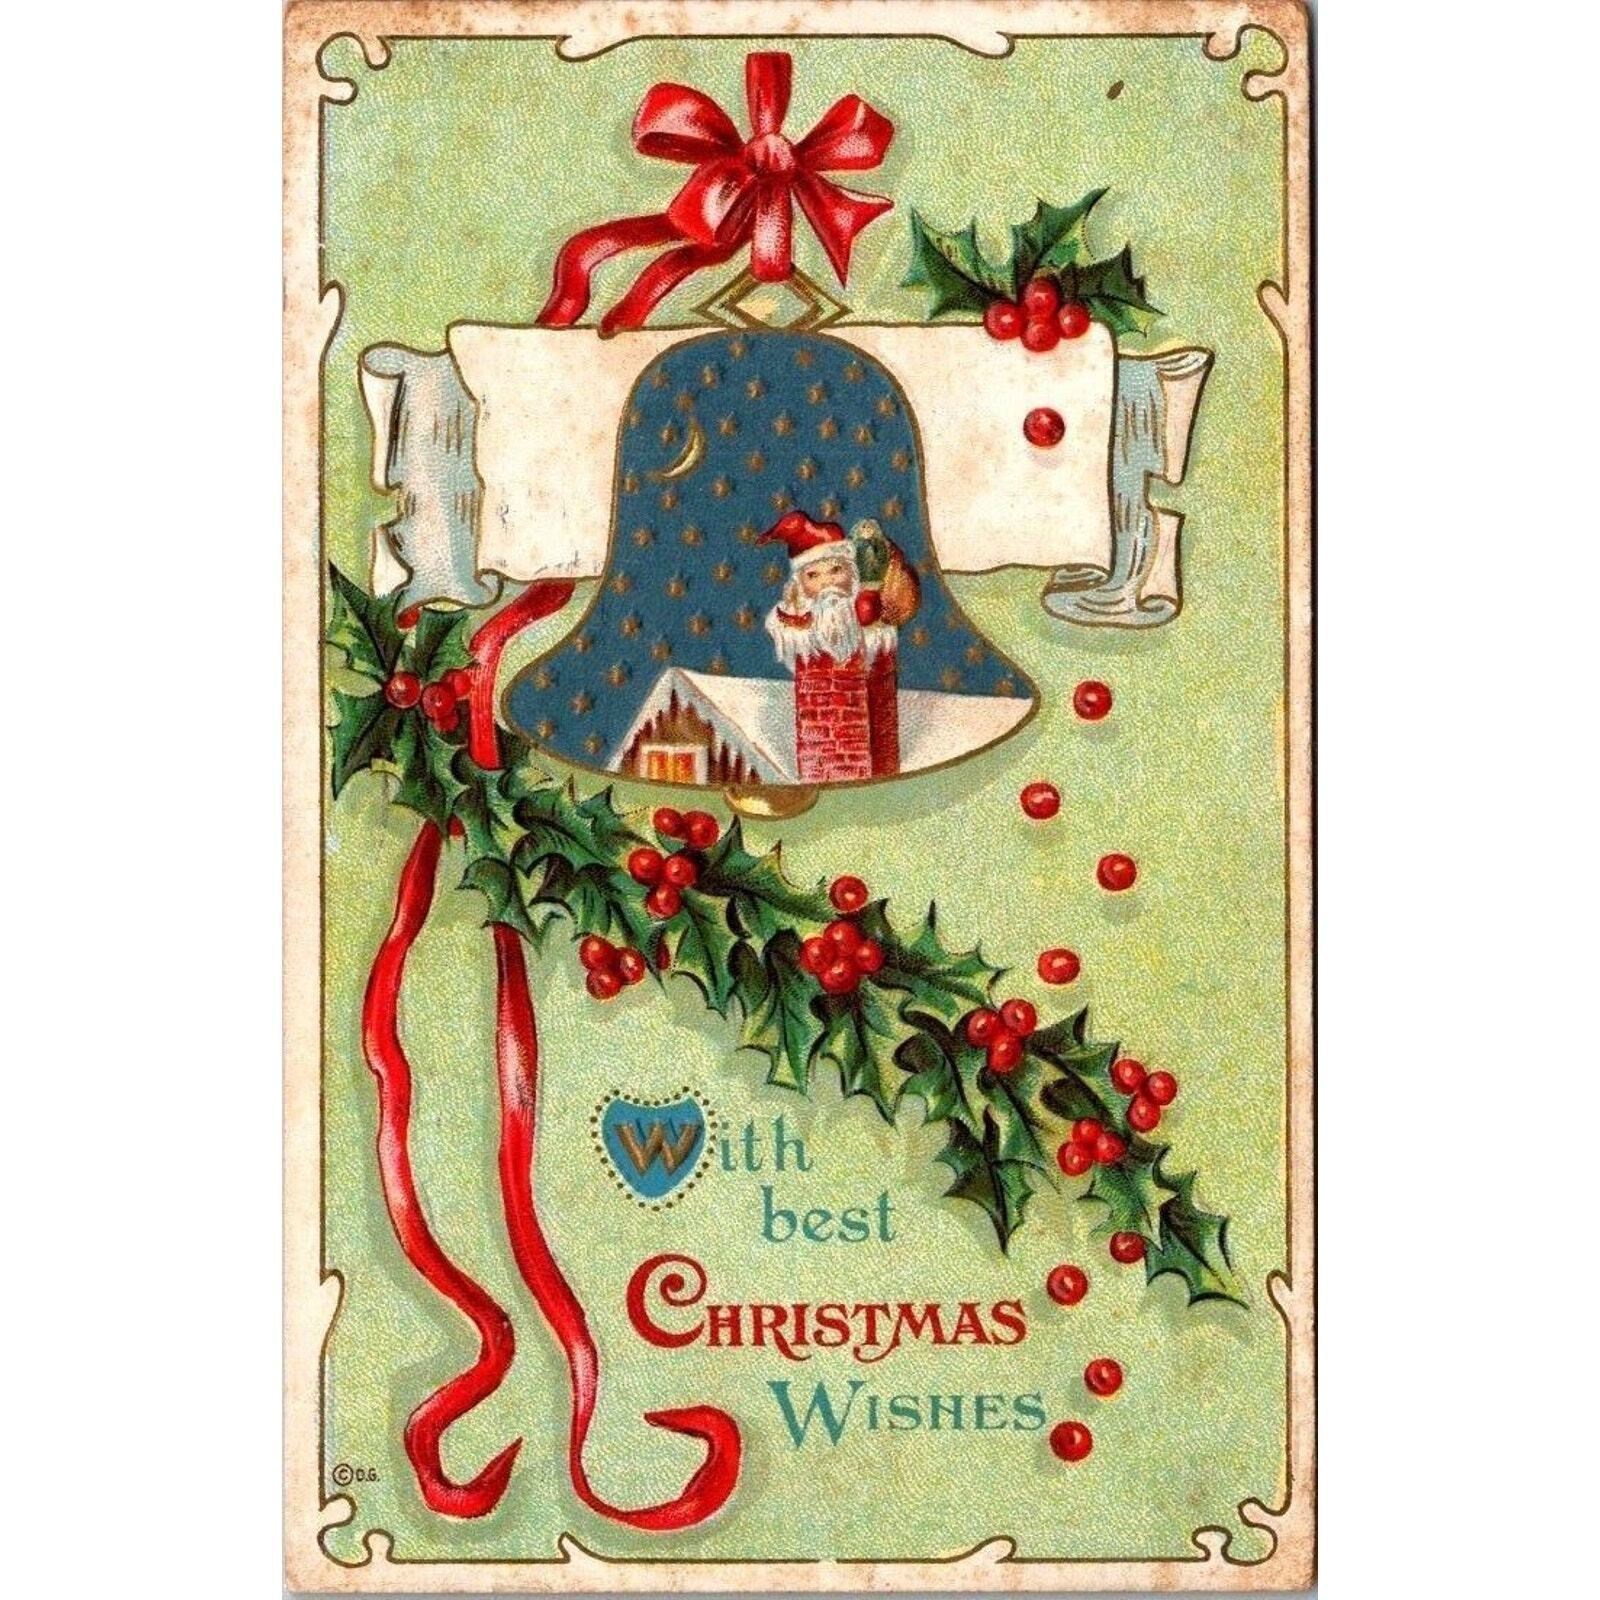 Vintage Holiday Postcard With Best Christmas Wishes Bell Santa Postmark 1911